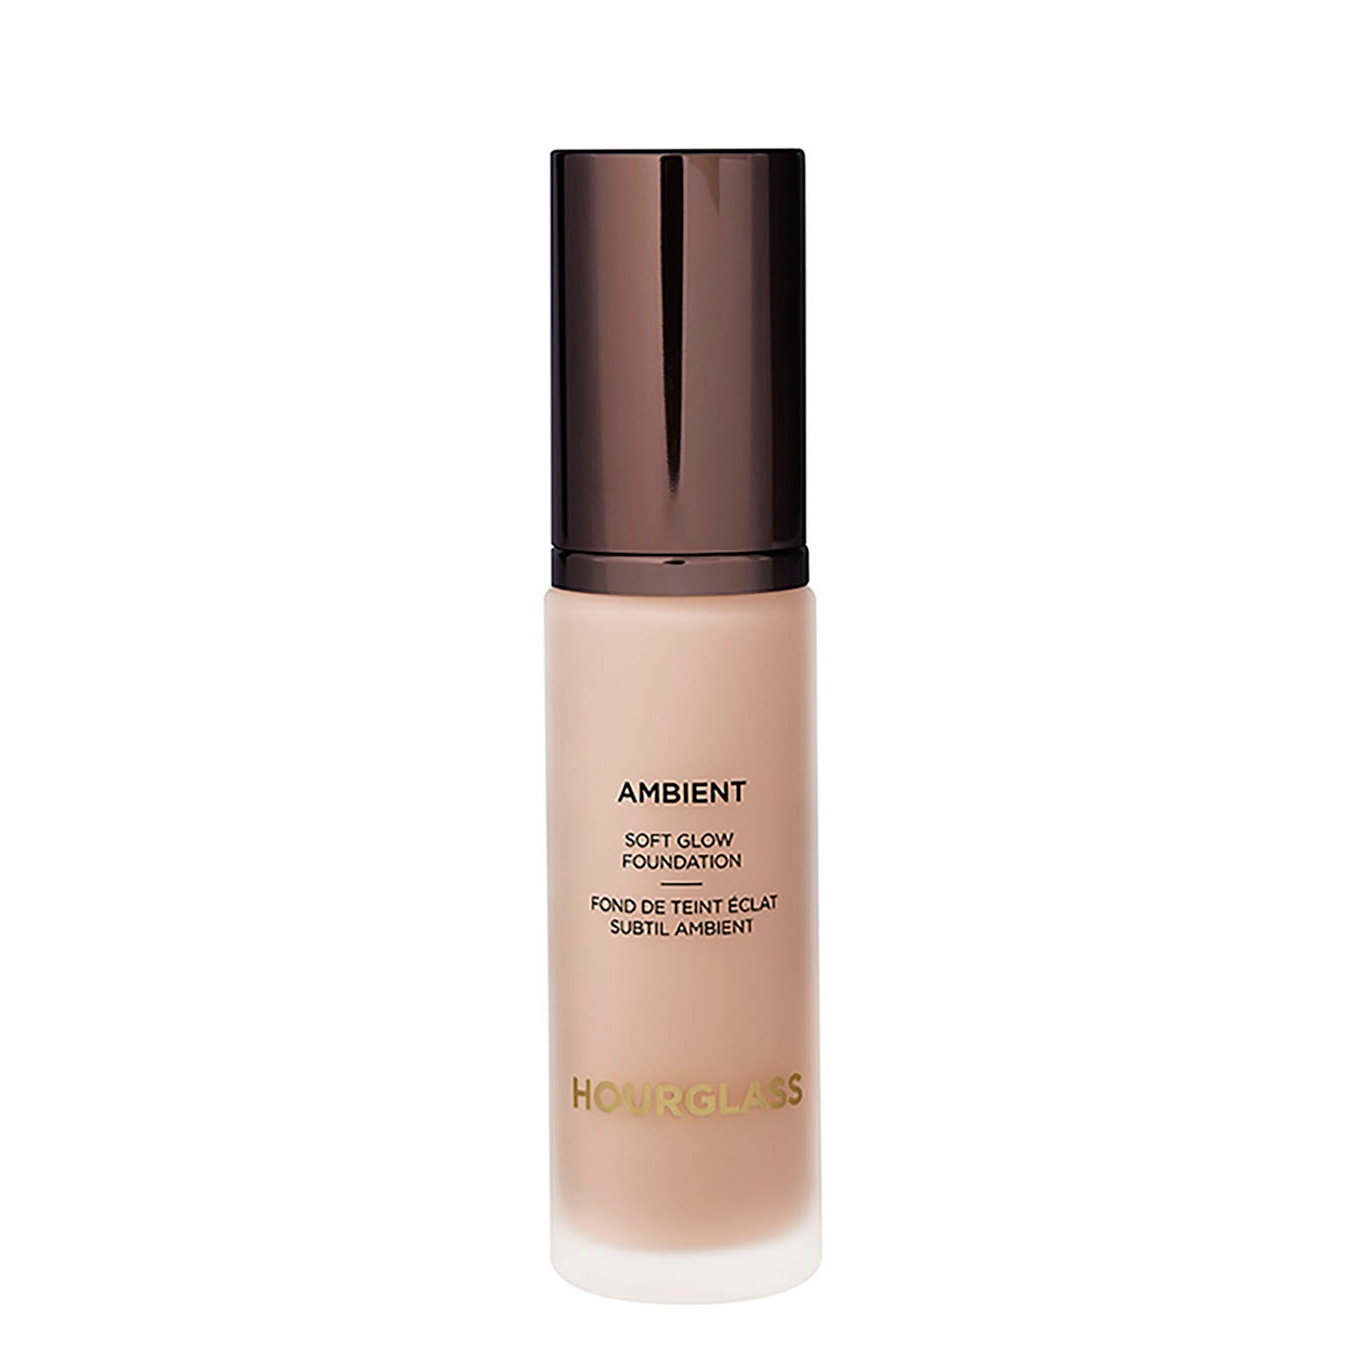 Hourglass Ambient Soft Glow Foundation - Colour 1.5